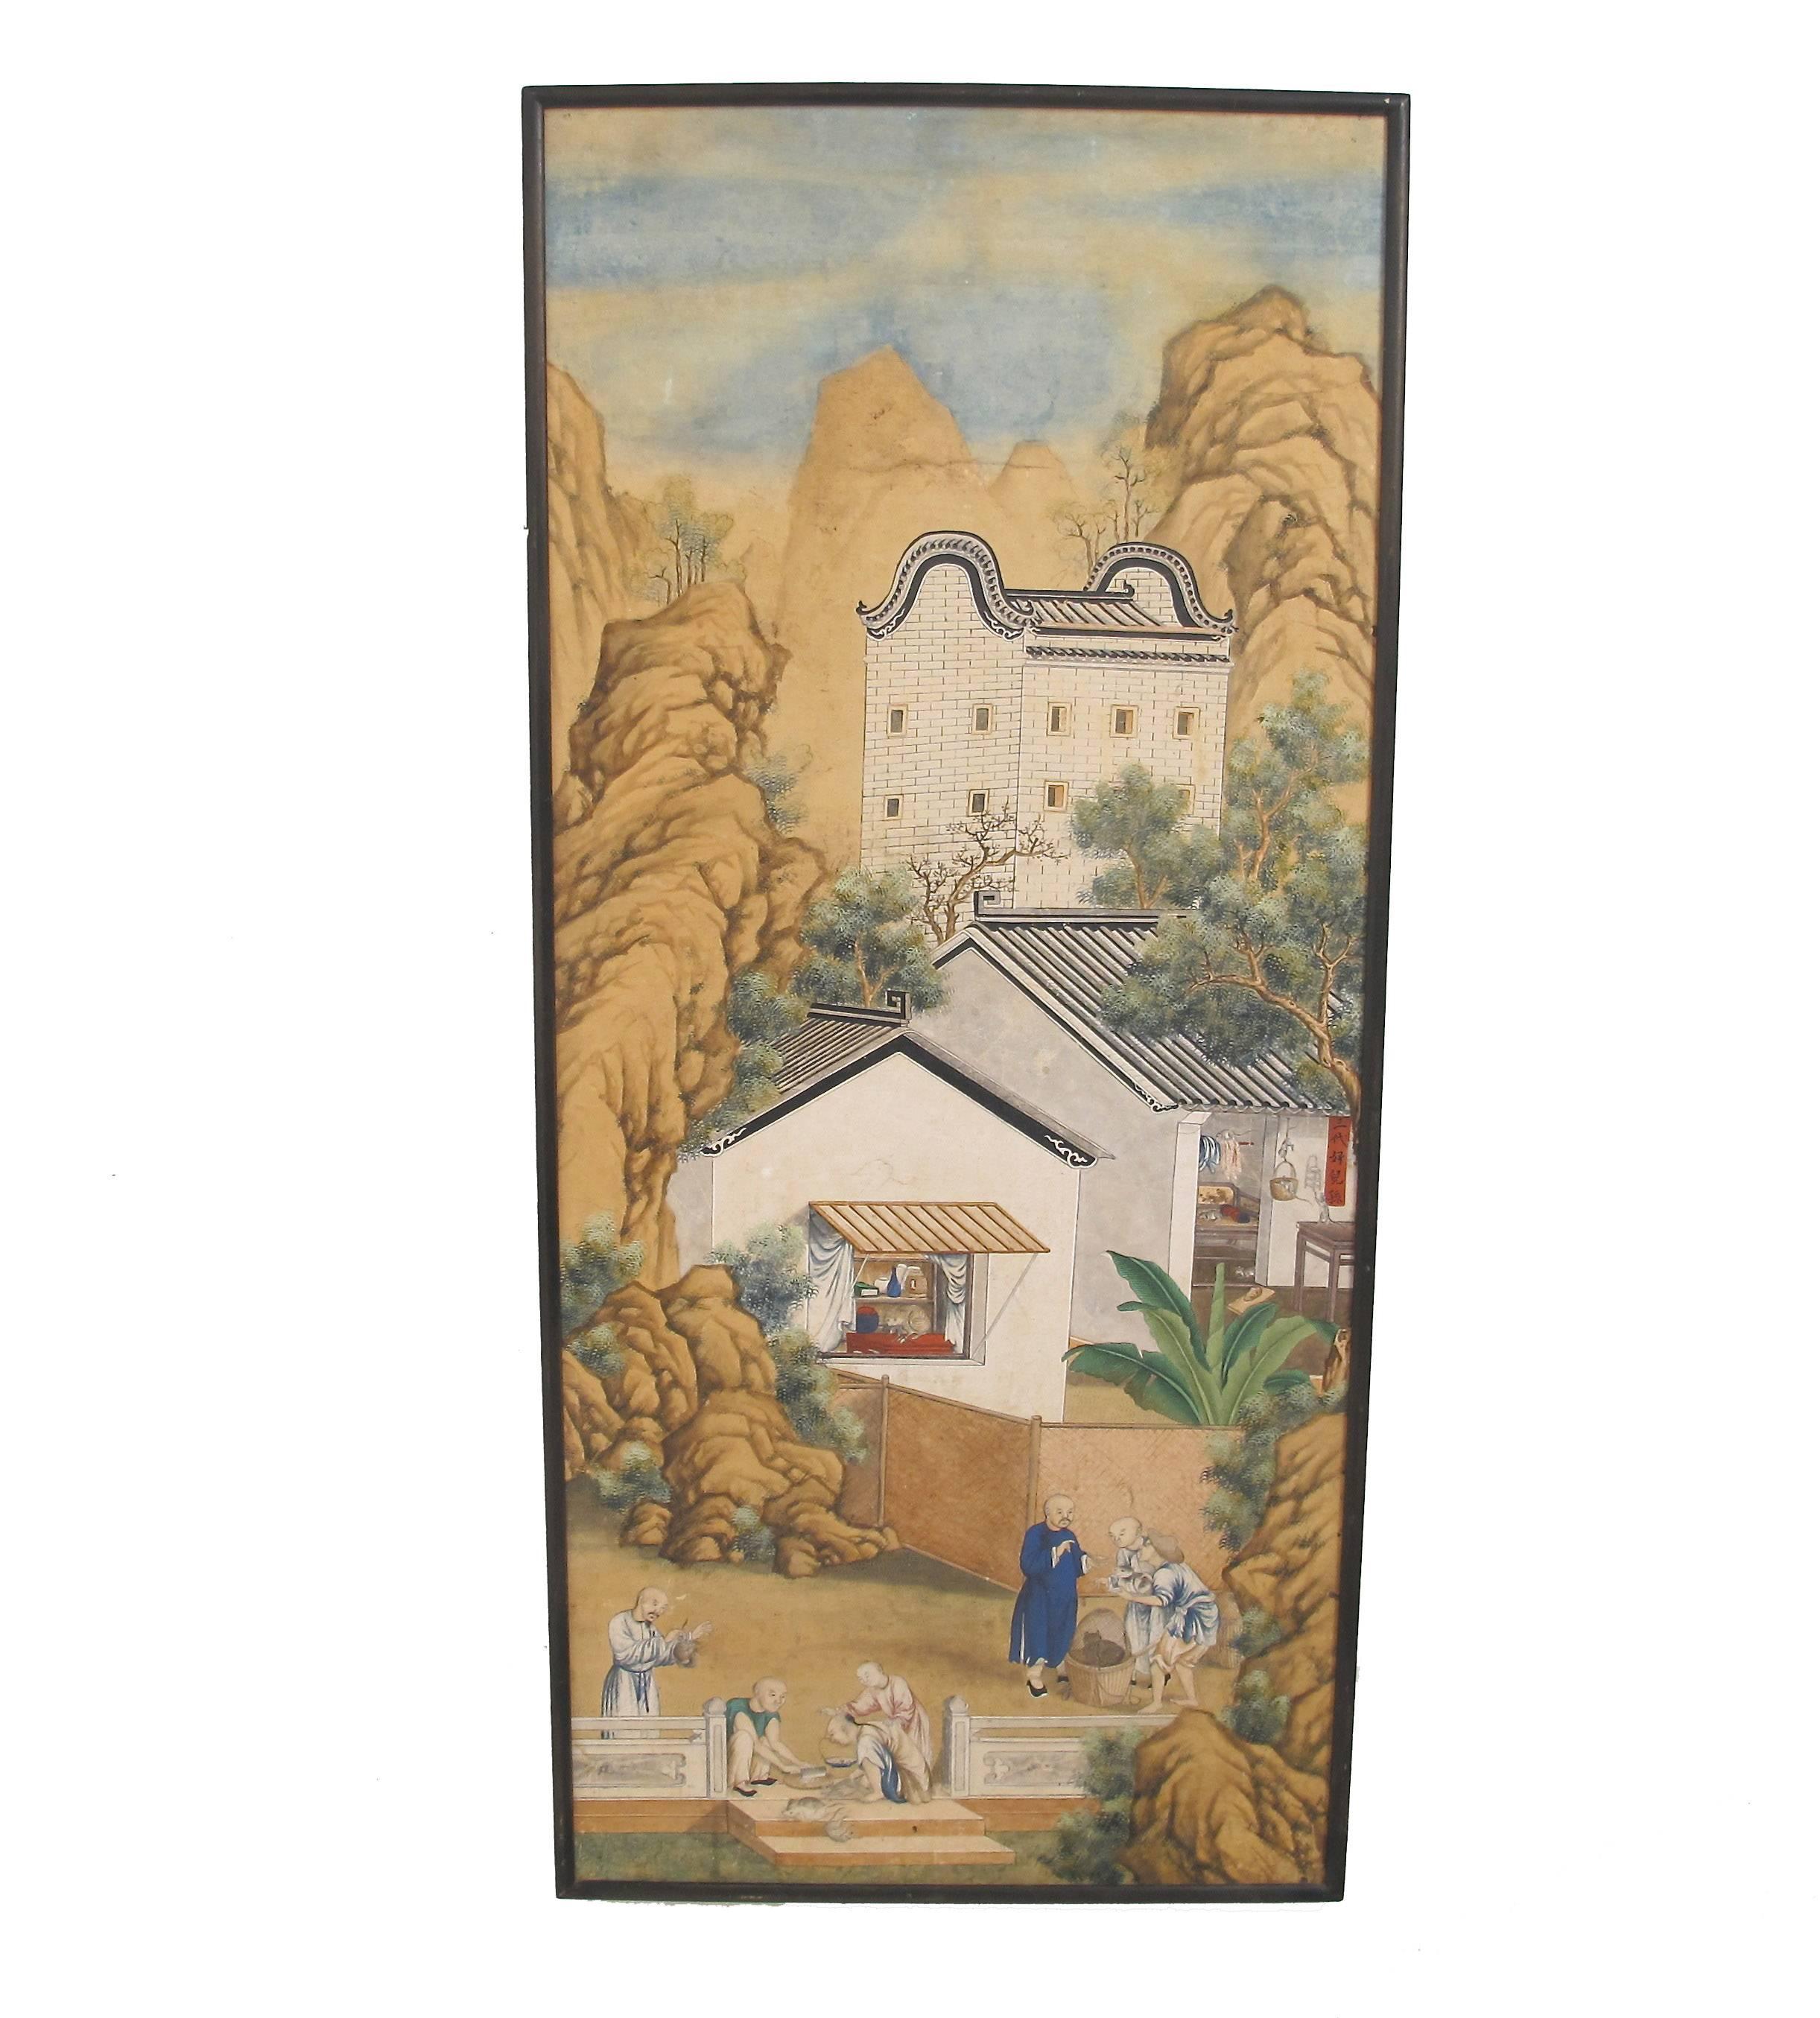 A finely detailed village scene, watercolor painted on paper in wood frame, Chinese, 19th century.